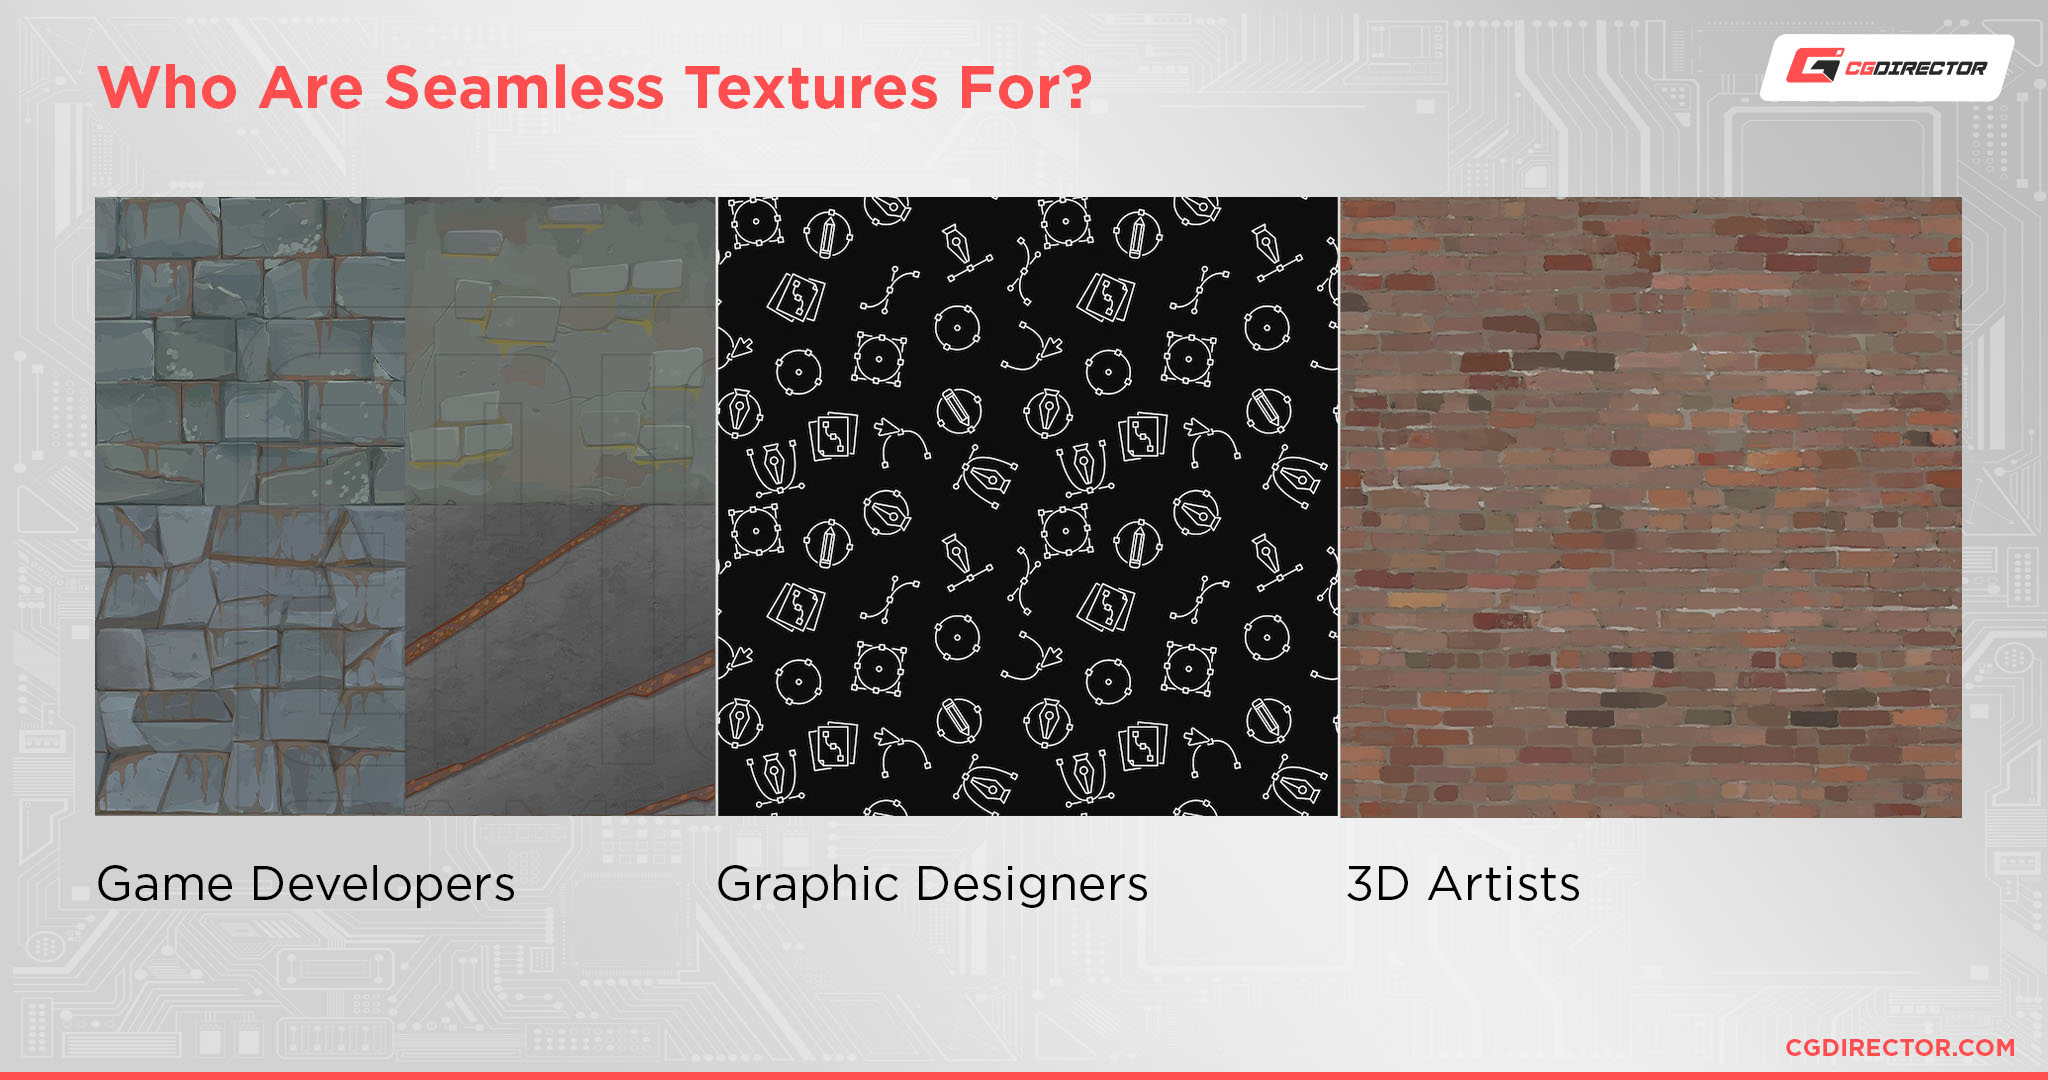 Who Are Seamless Textures For